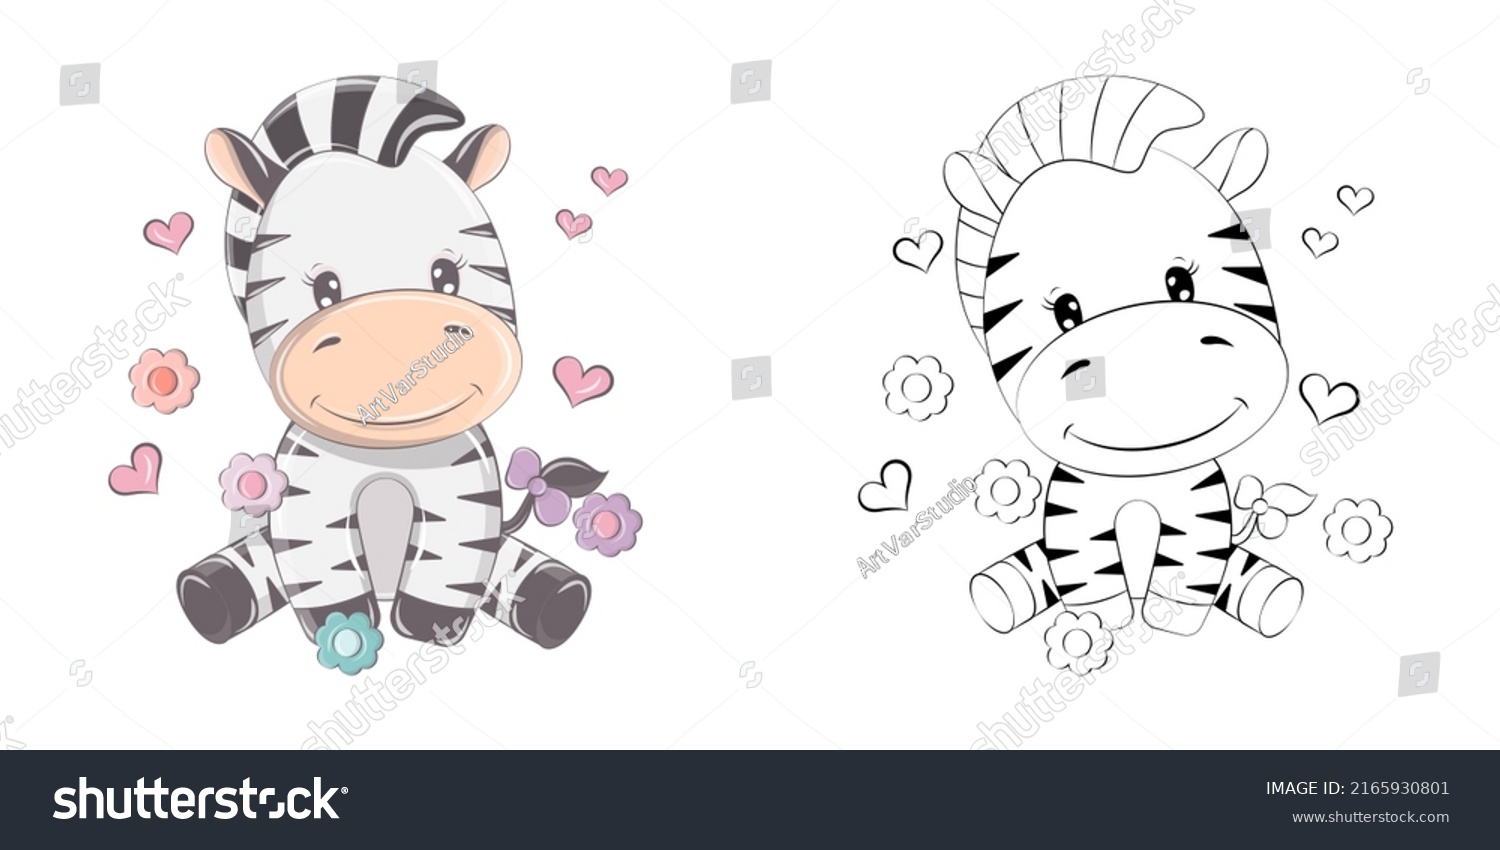 SVG of Cute Clipart Zebra Illustration and For Coloring Page. Cartoon Clip Art Zebra with Flowers and Hearts. Vector Illustration of an Animal for Stickers, Baby Shower, Coloring Pages, Prints for Clothes.  svg